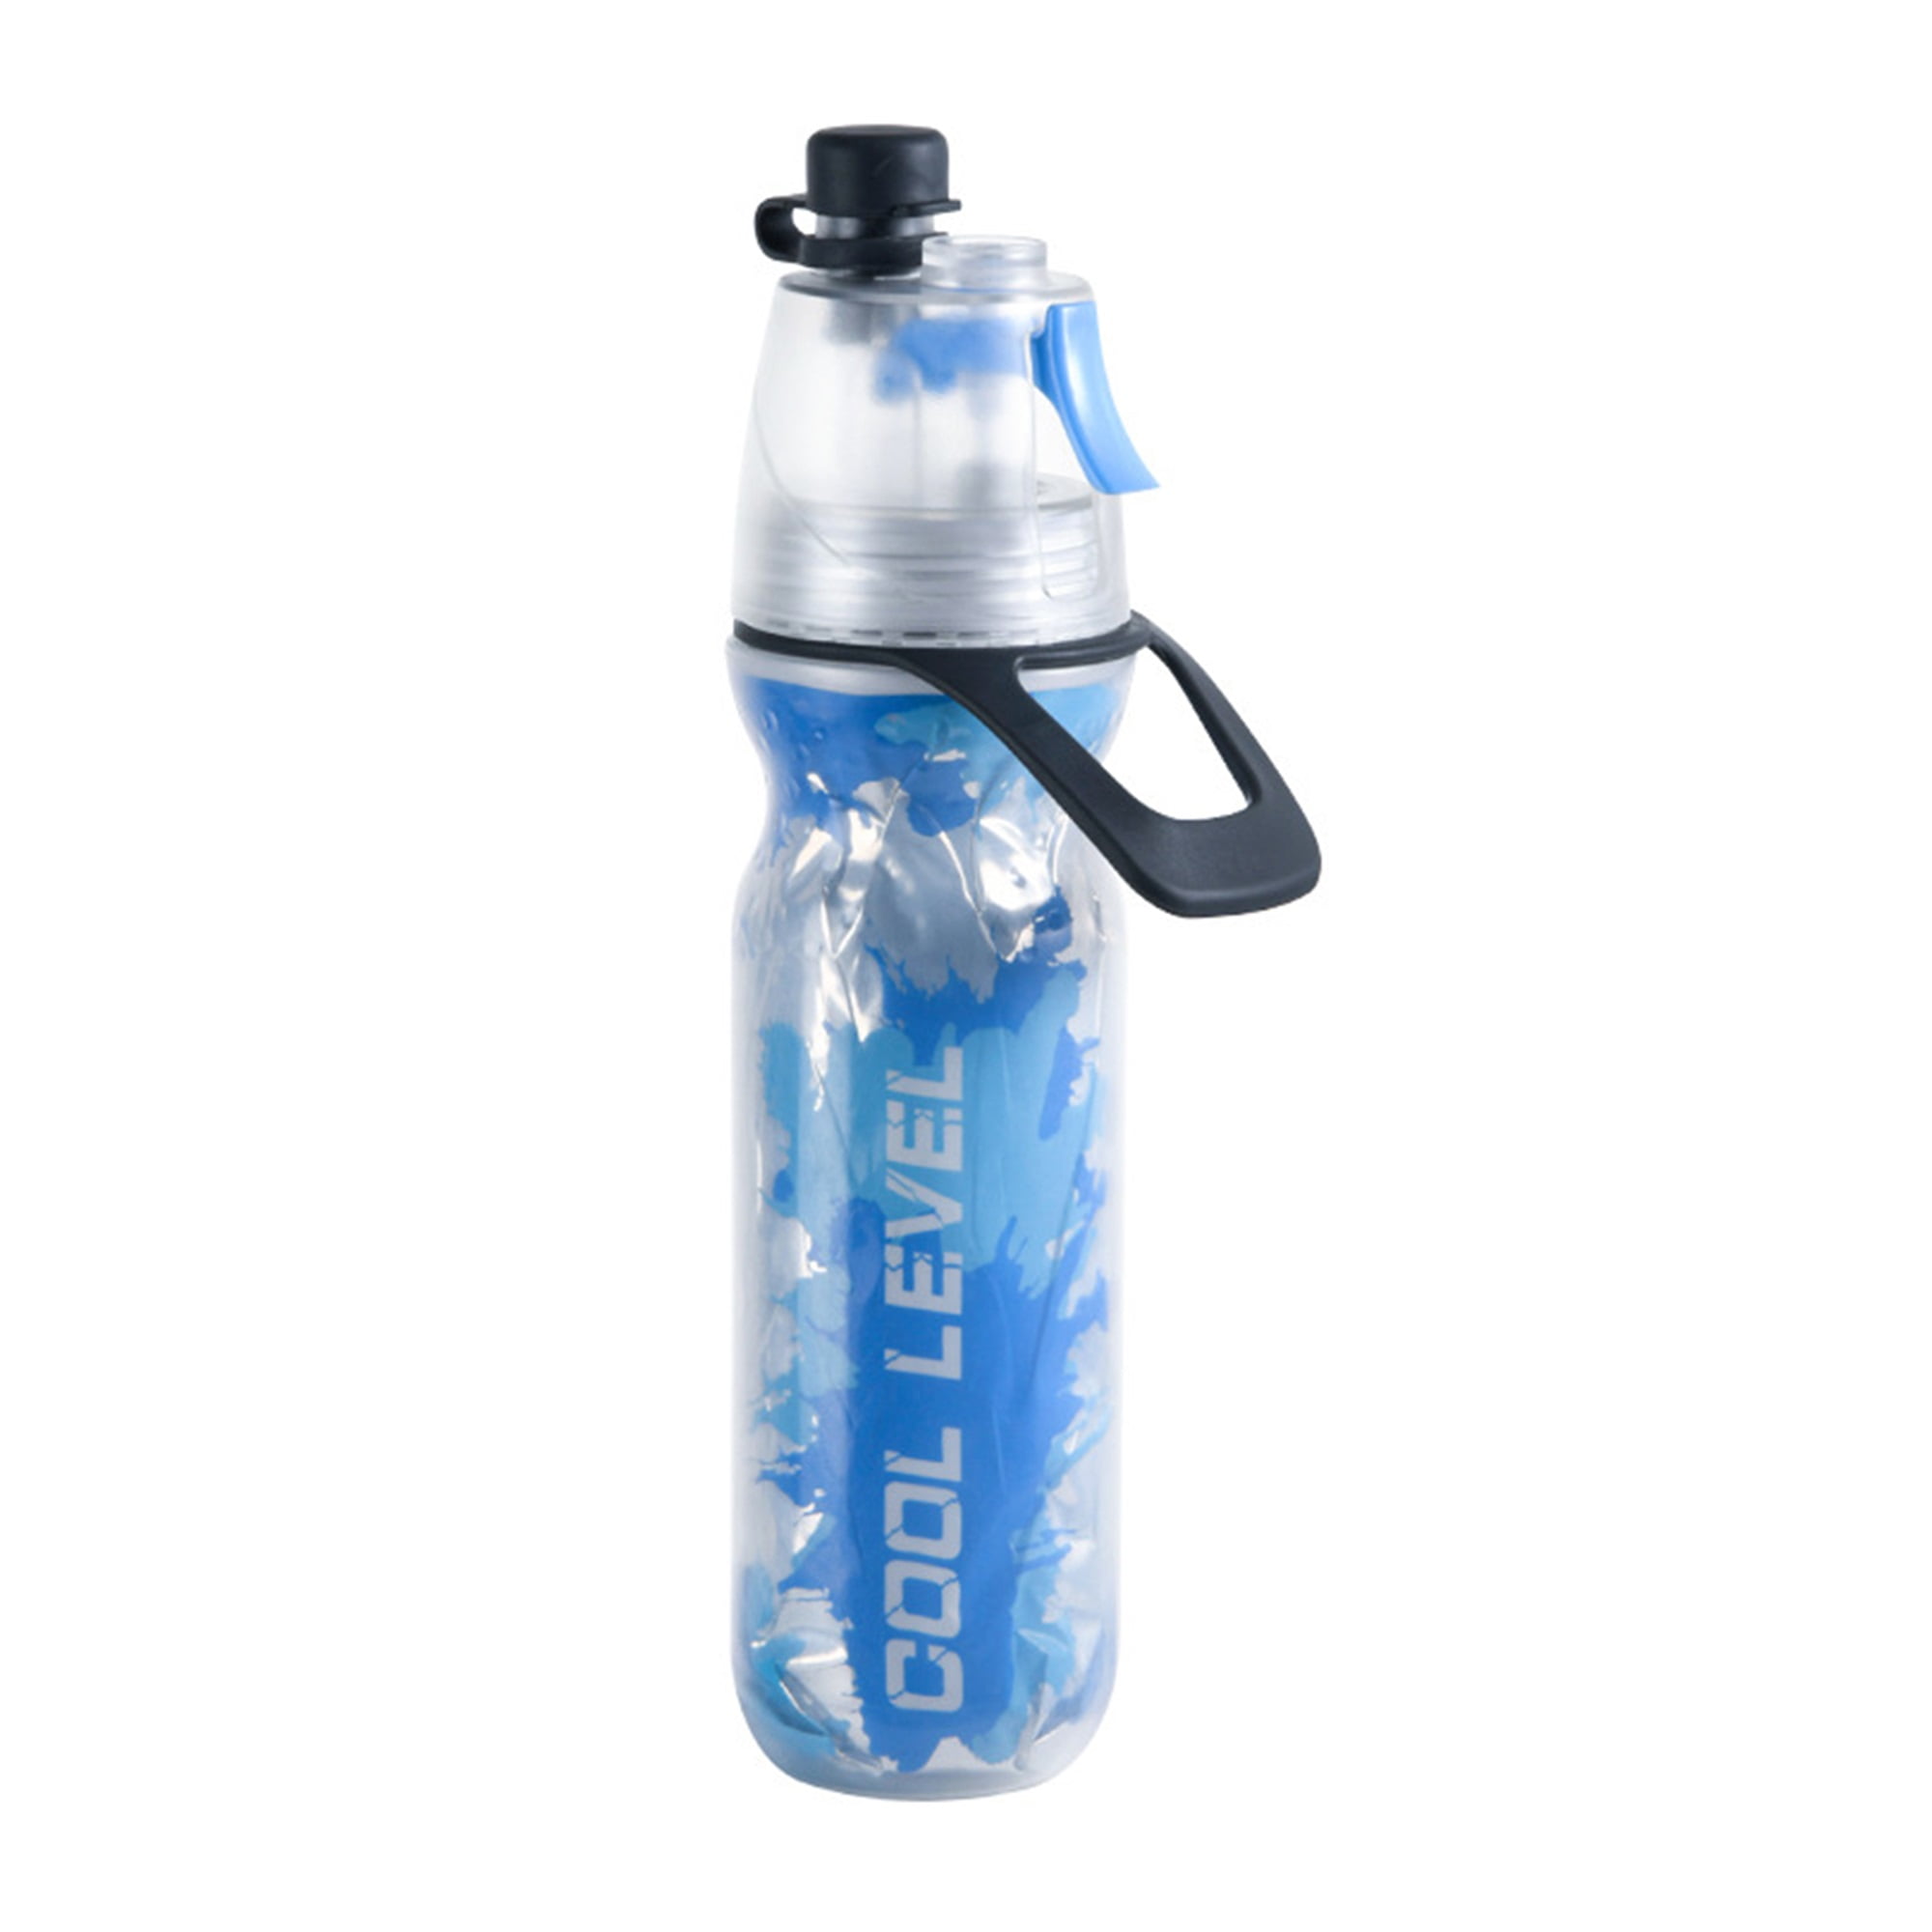 25oz double wall BPA free Stainless Steel Water Bottle vacuum insulated flask 